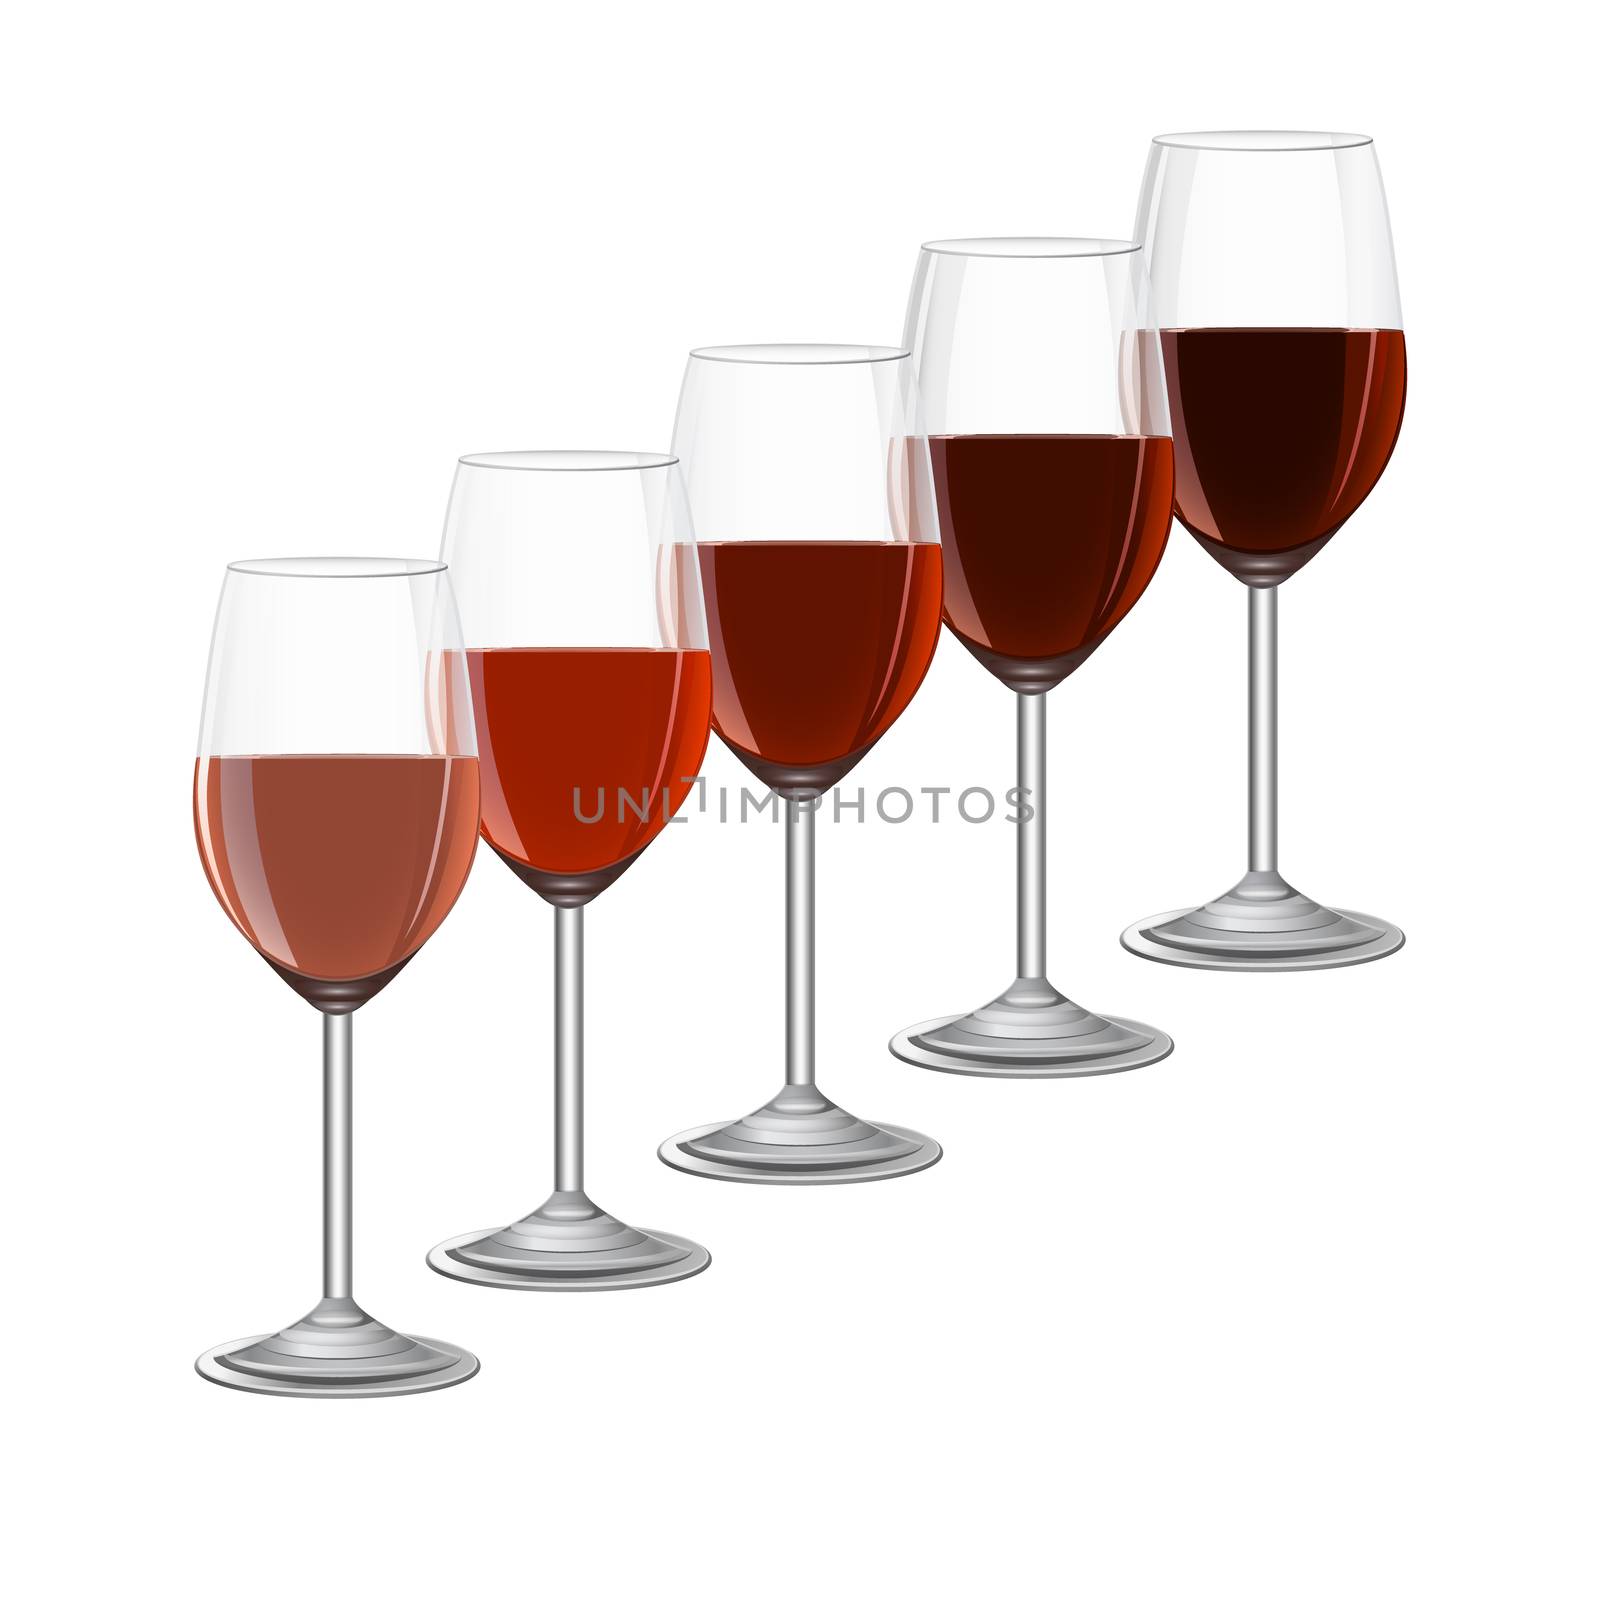 glasses of wine on metal stand isolated on white backgroud by Lemon_workshop